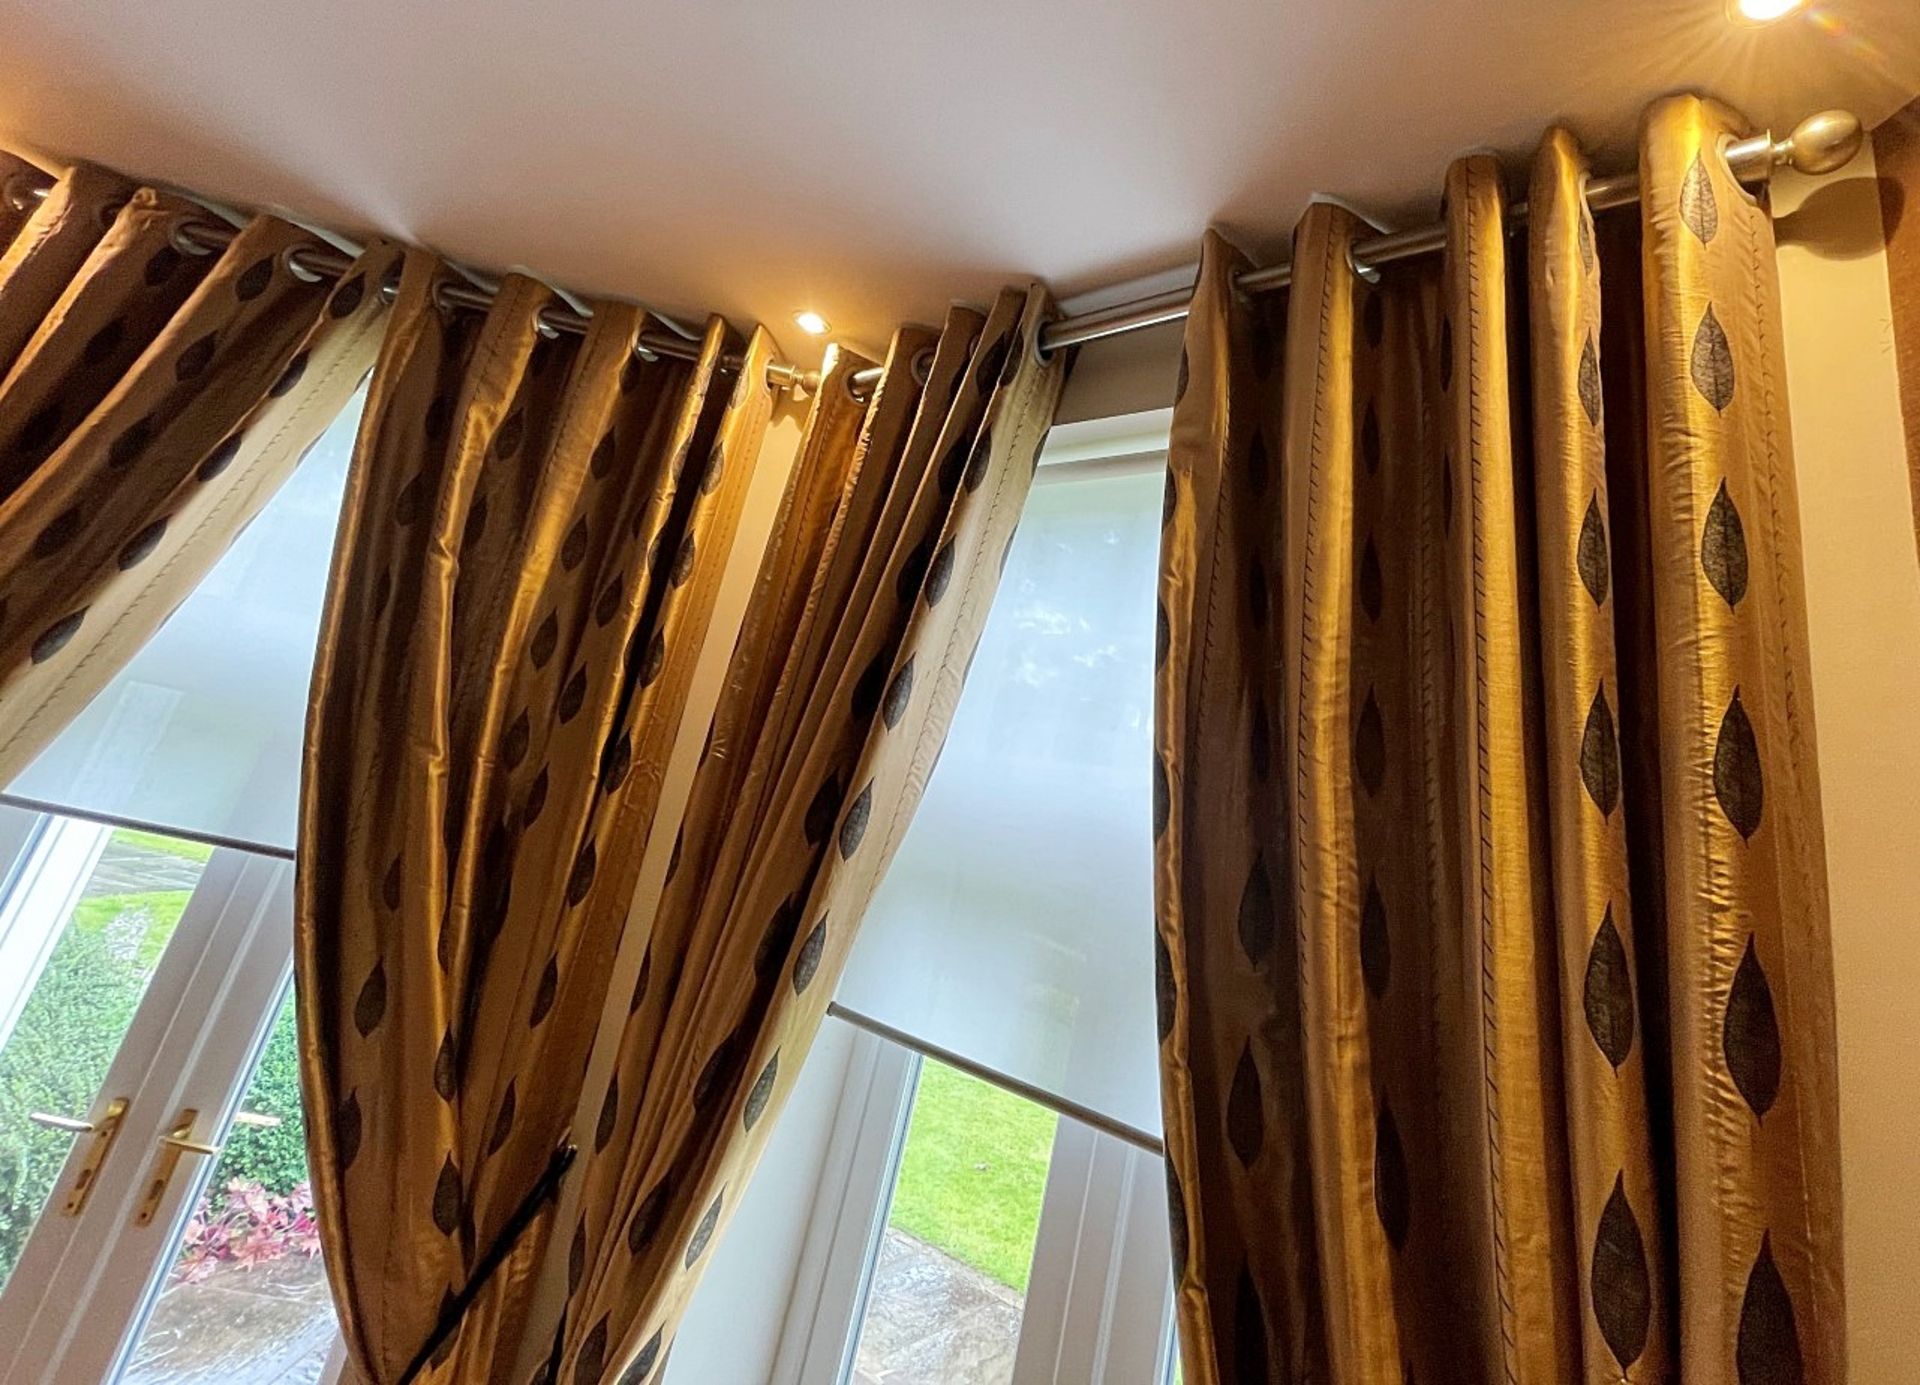 3 x Sets Of Bespoke Premium Quality Lined Curtains In Gold With A Leaf Design - 285cm Drop - Image 2 of 20